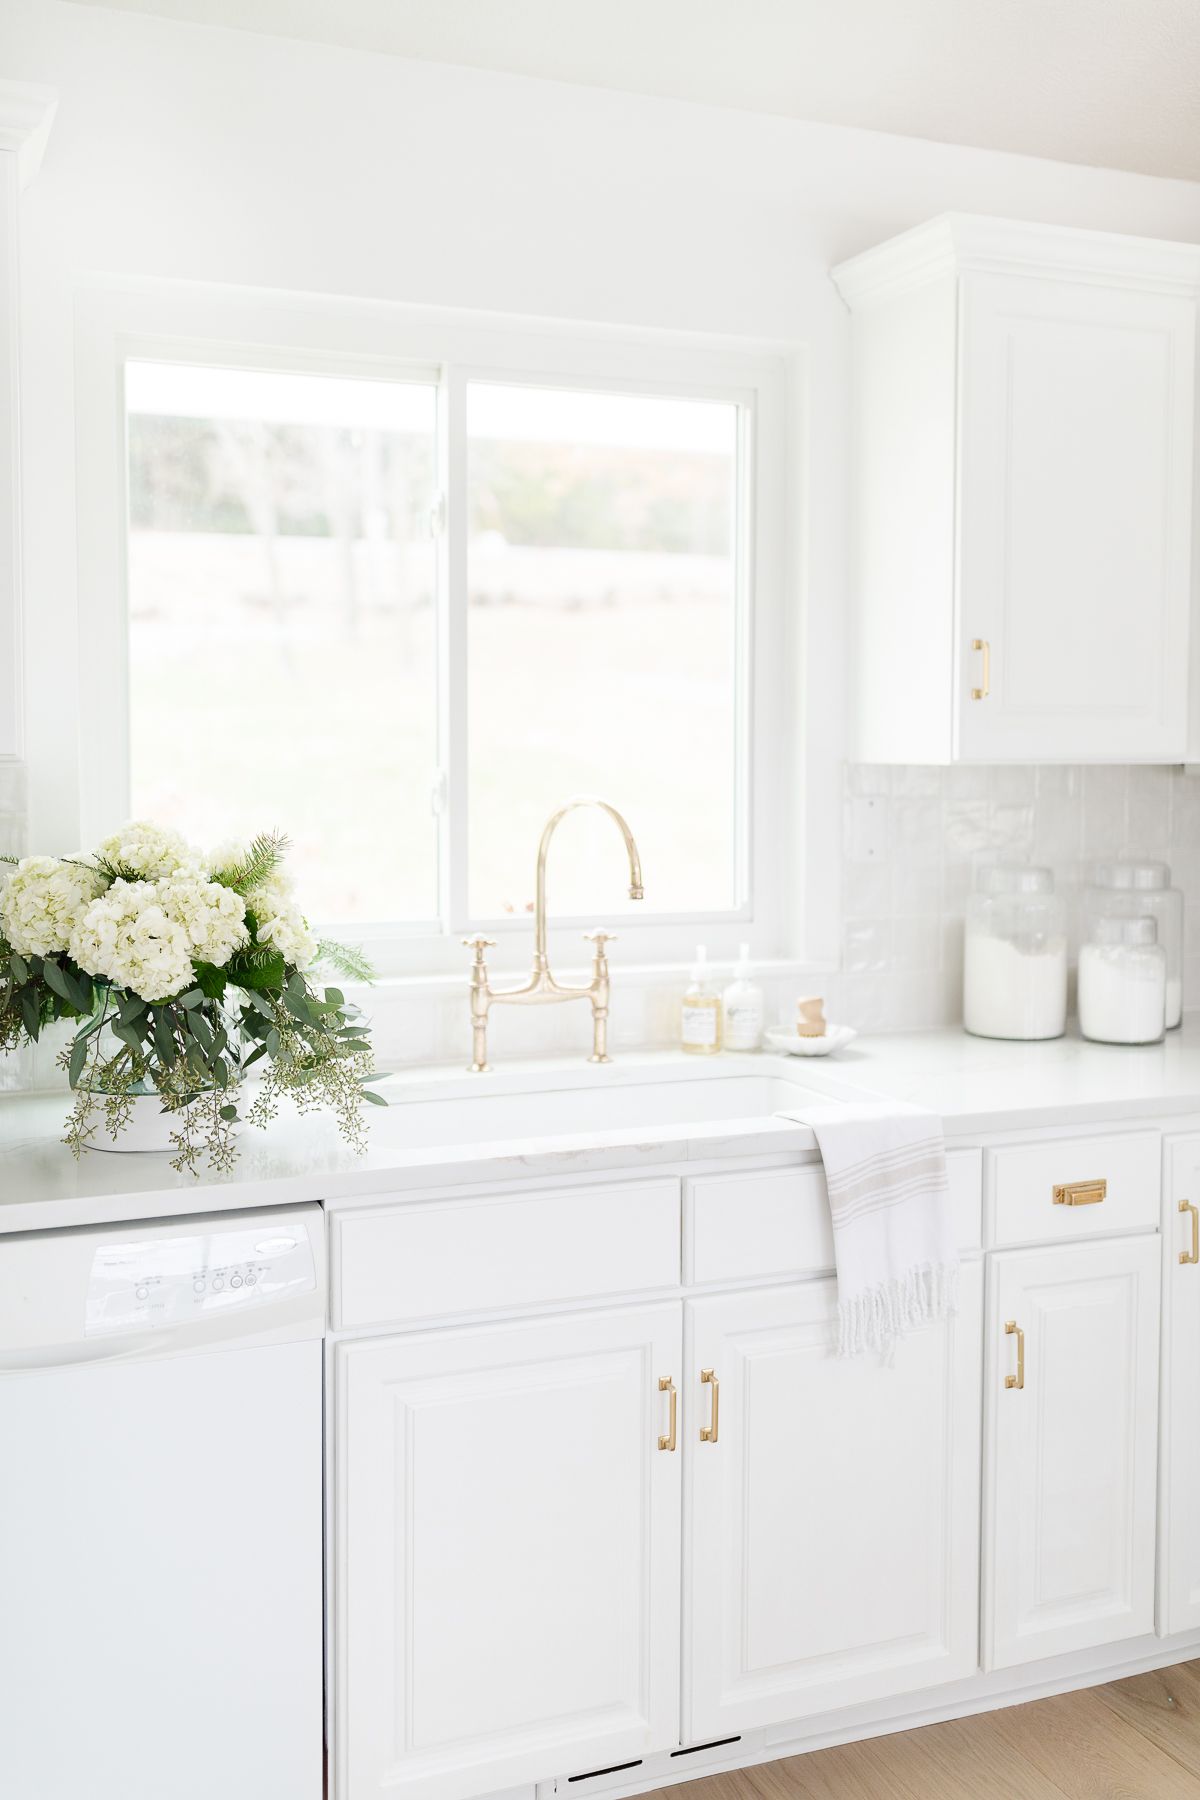 A white kitchen with white tile and a white grout color